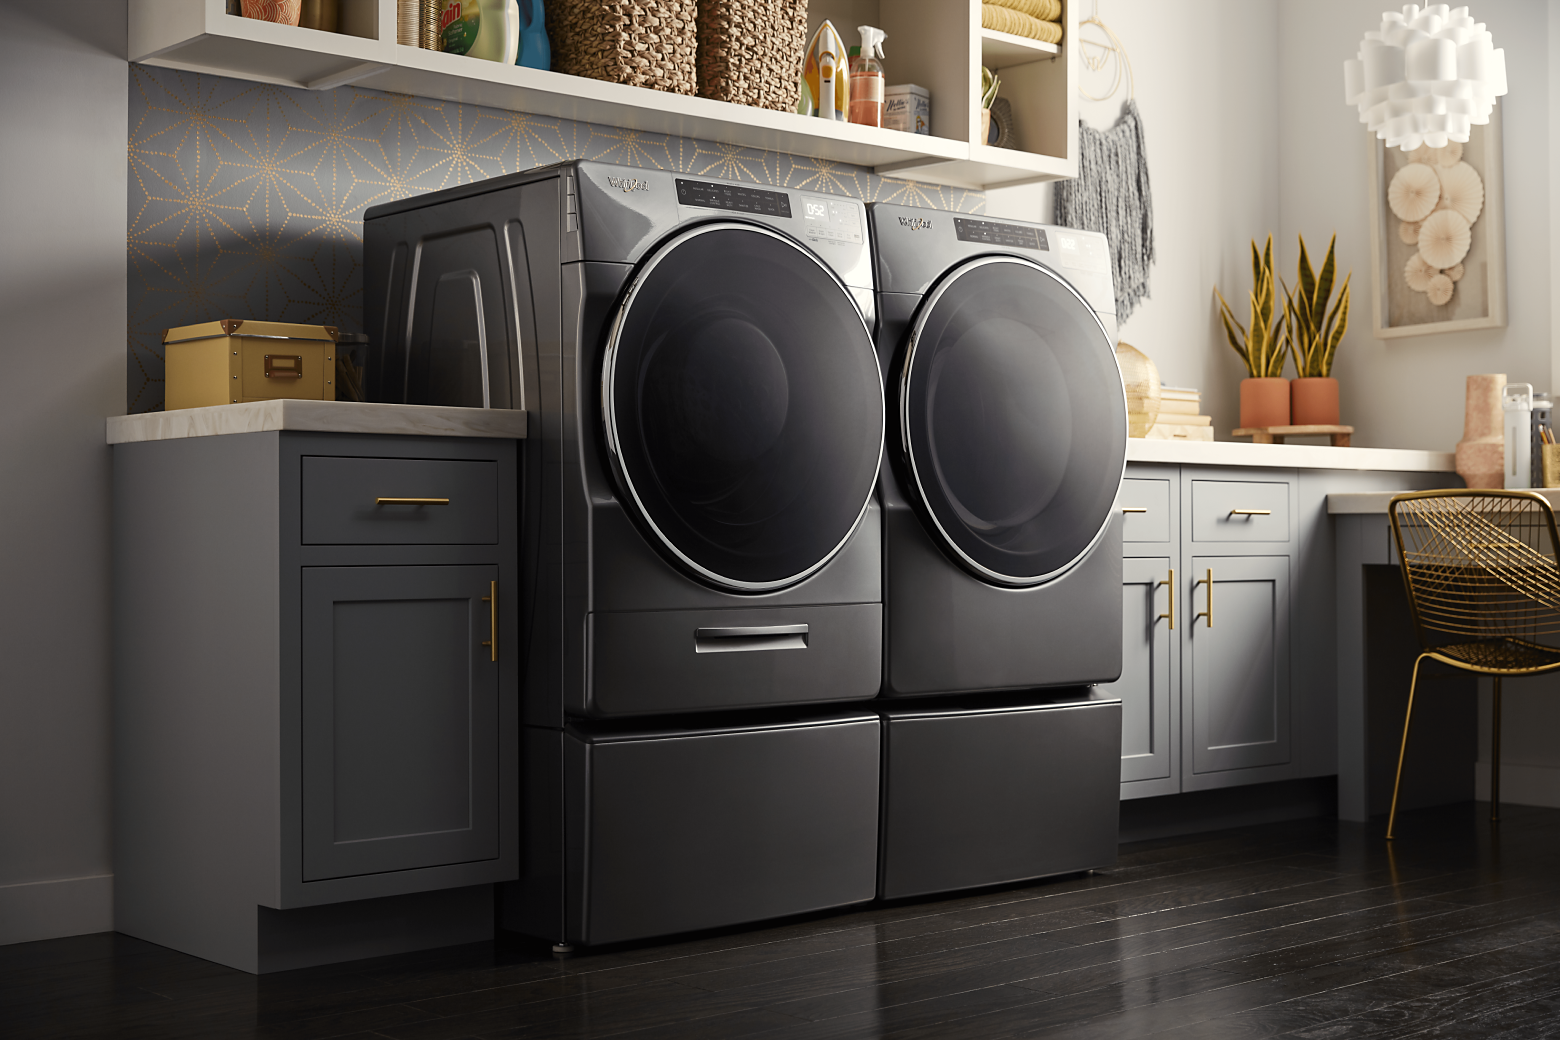 Whirlpool® Washer and Dryer in a laundry room